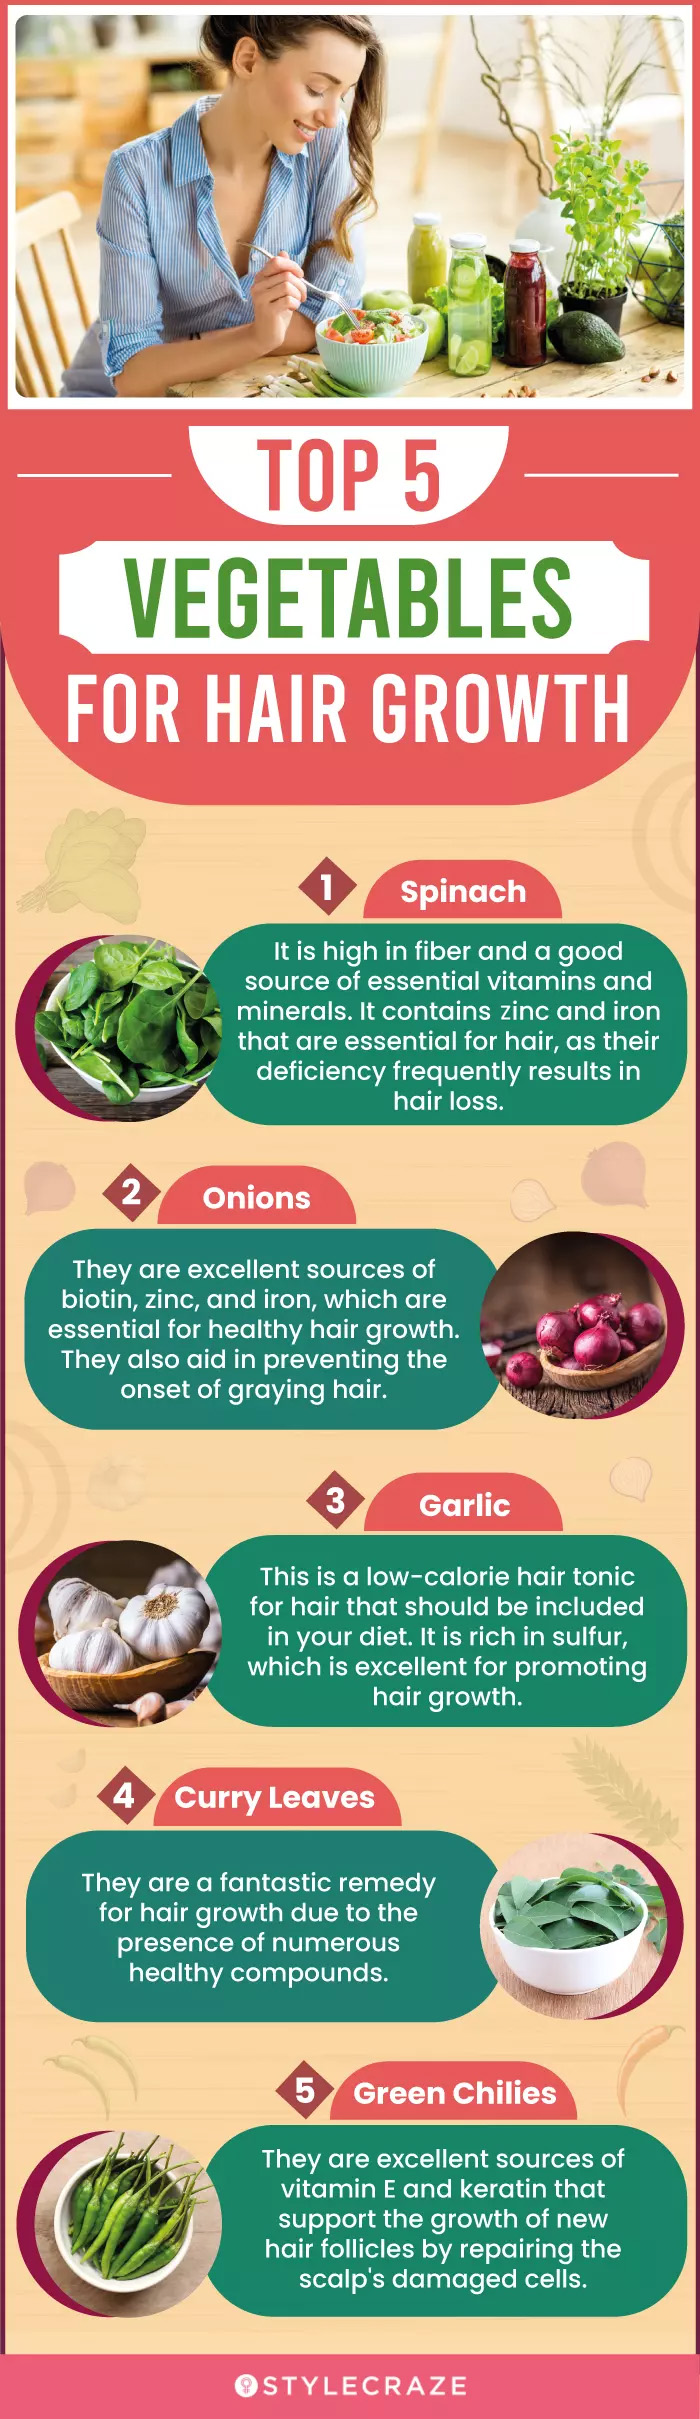 allplants | Eat Your Way To Luscious Locks: A Guide To Hair Growth For  Vegans